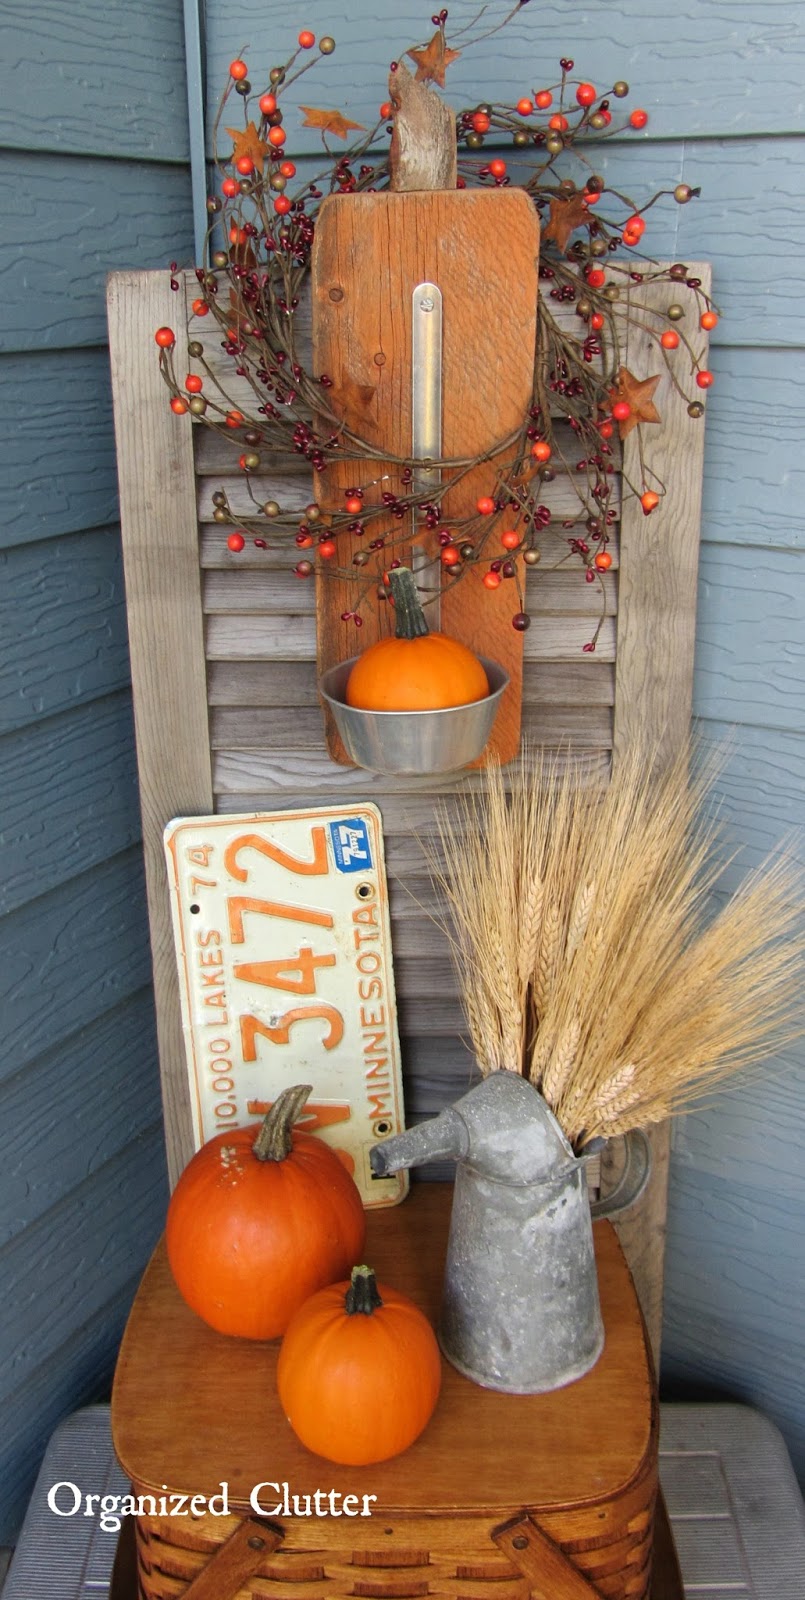 Add wheat and other products of harvest to your Fall arrangments.